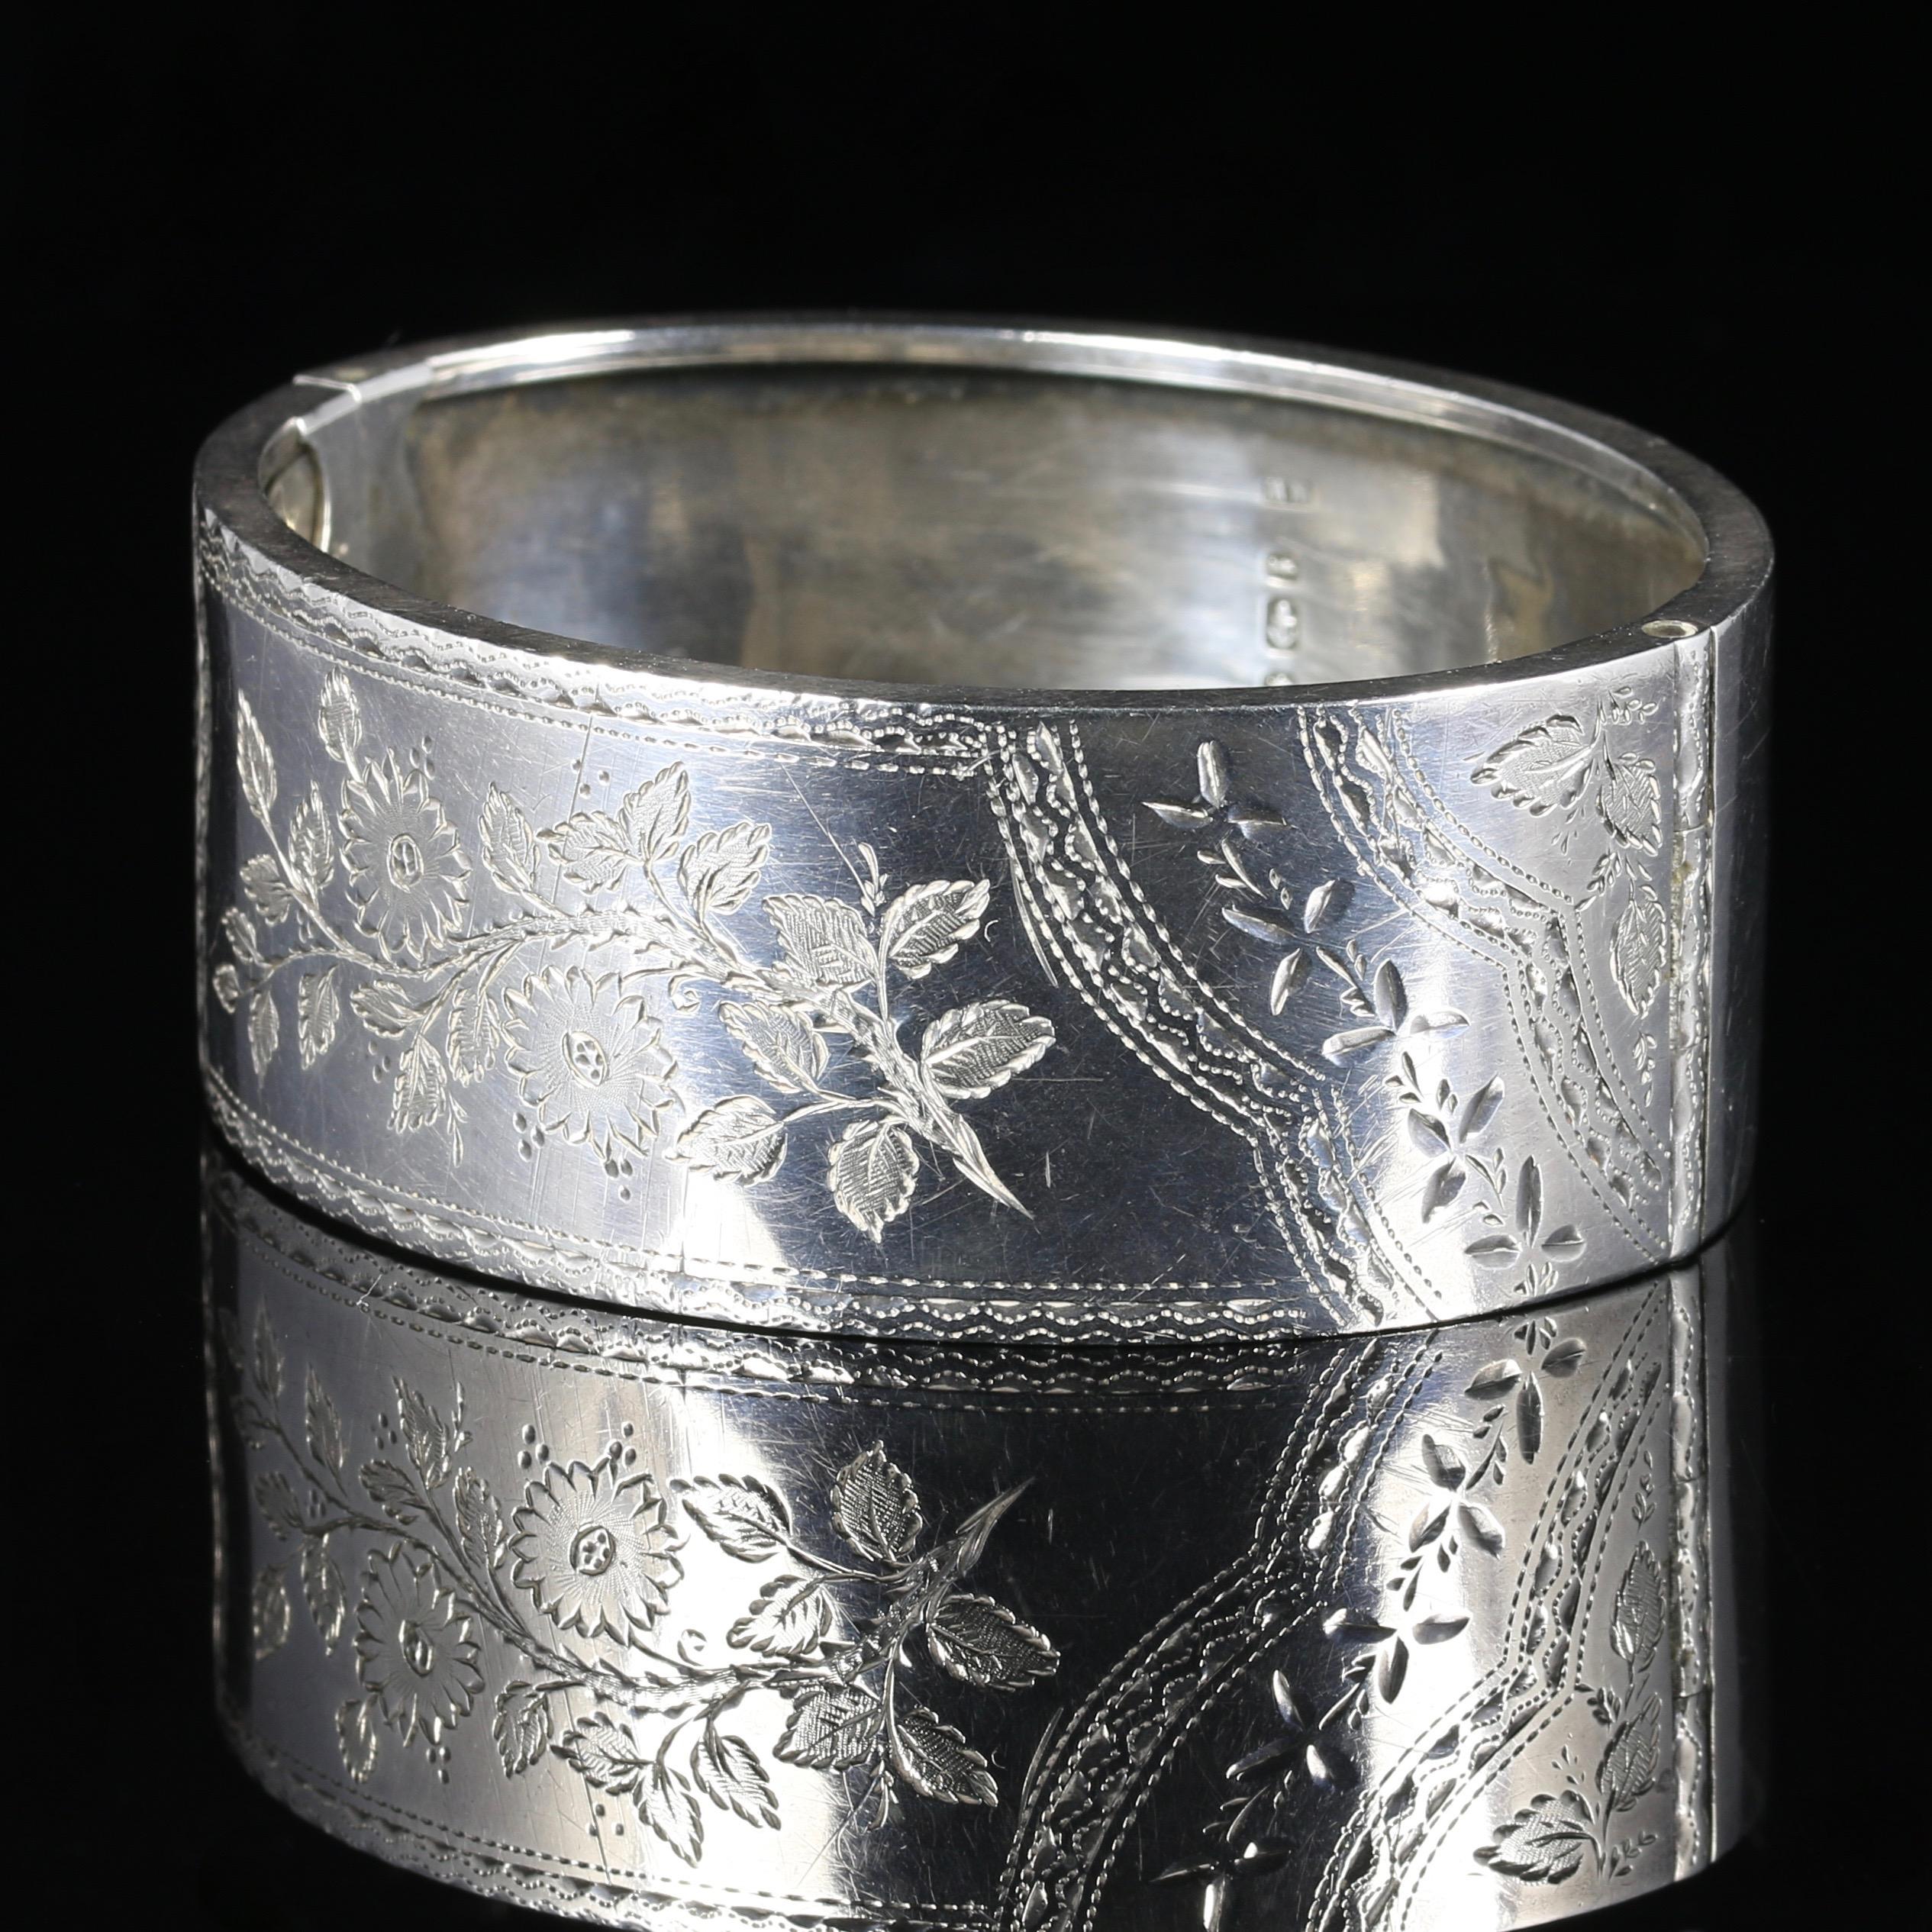 For more details please click continue reading down below...

This fabulous antique Victorian Sterling Silver bangle is dated Birmingham 1893.

Steeped in English history and adorned with pristine workmanship.

Ivy means I cling to thee. Forget me